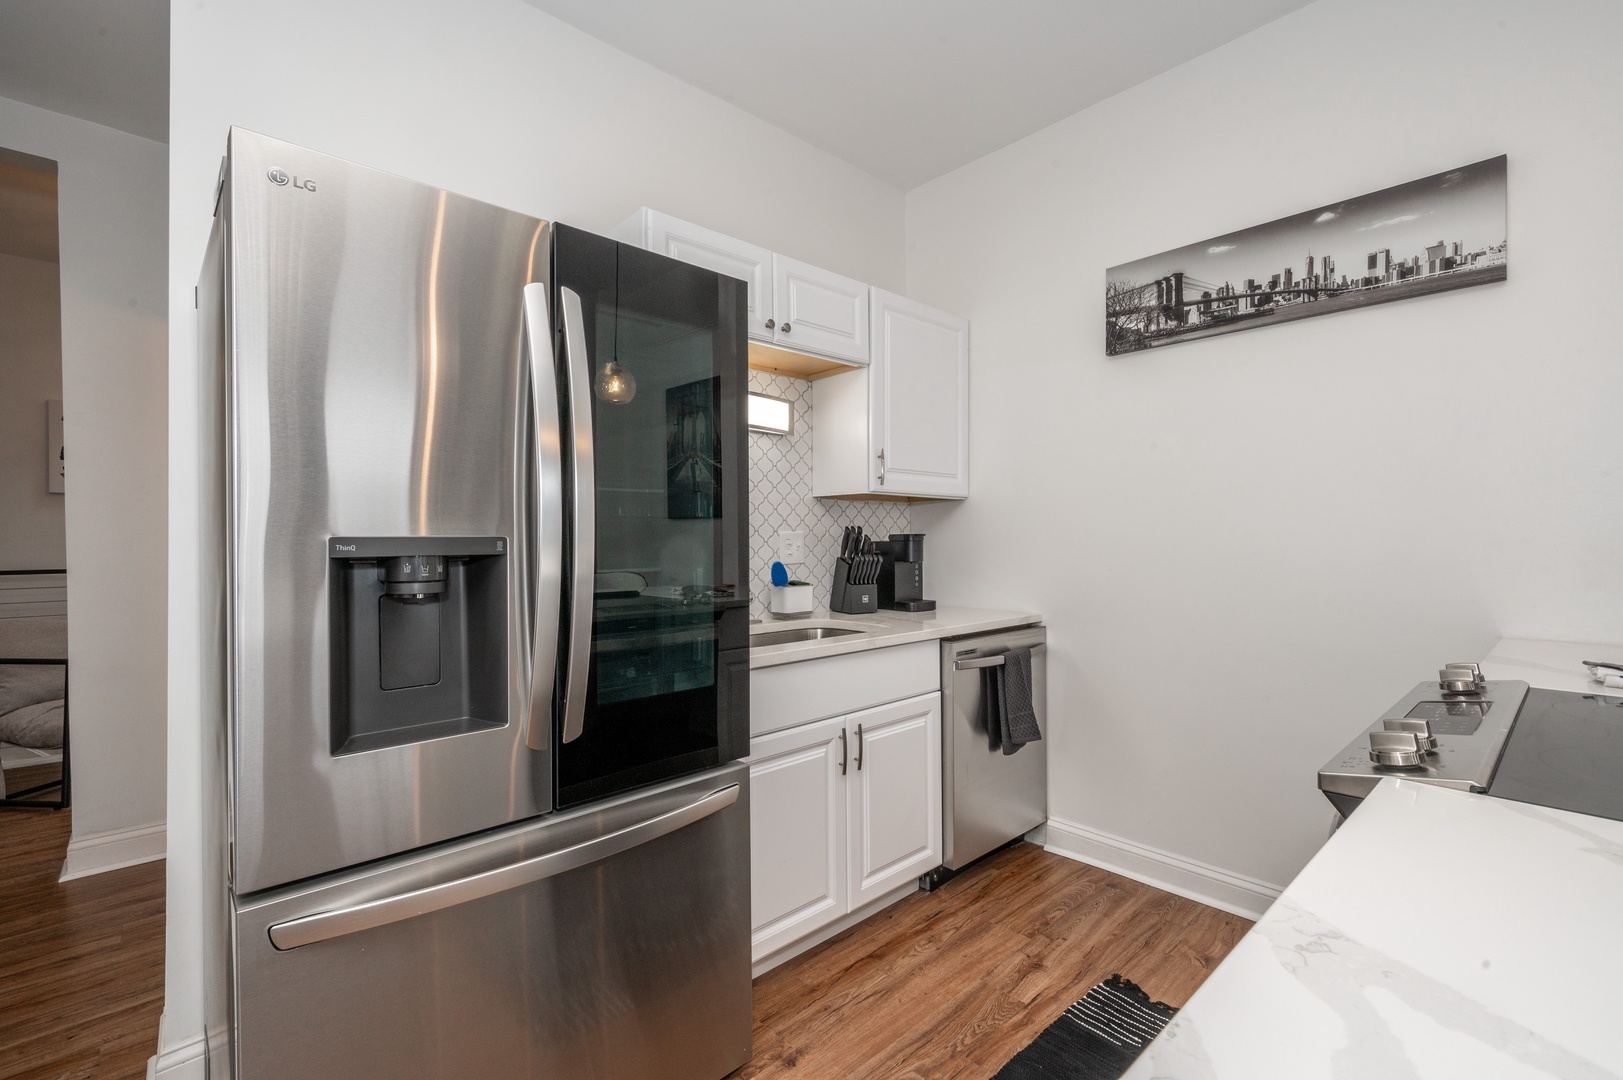 Unit 3: The well-equipped kitchen is spacious and open to the living area